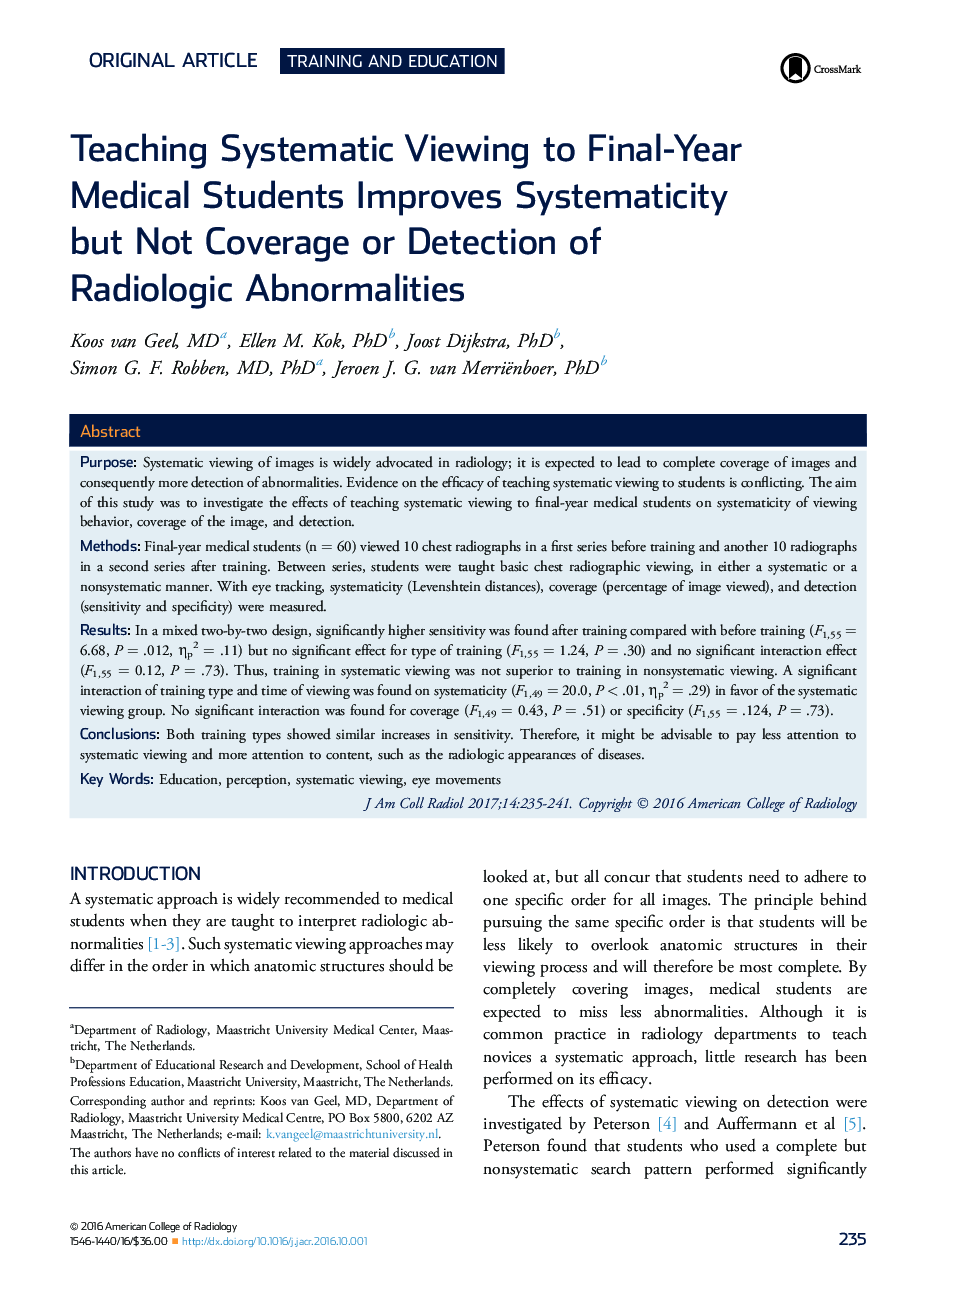 Teaching Systematic Viewing to Final-Year Medical Students Improves Systematicity but Not Coverage or Detection of Radiologic Abnormalities